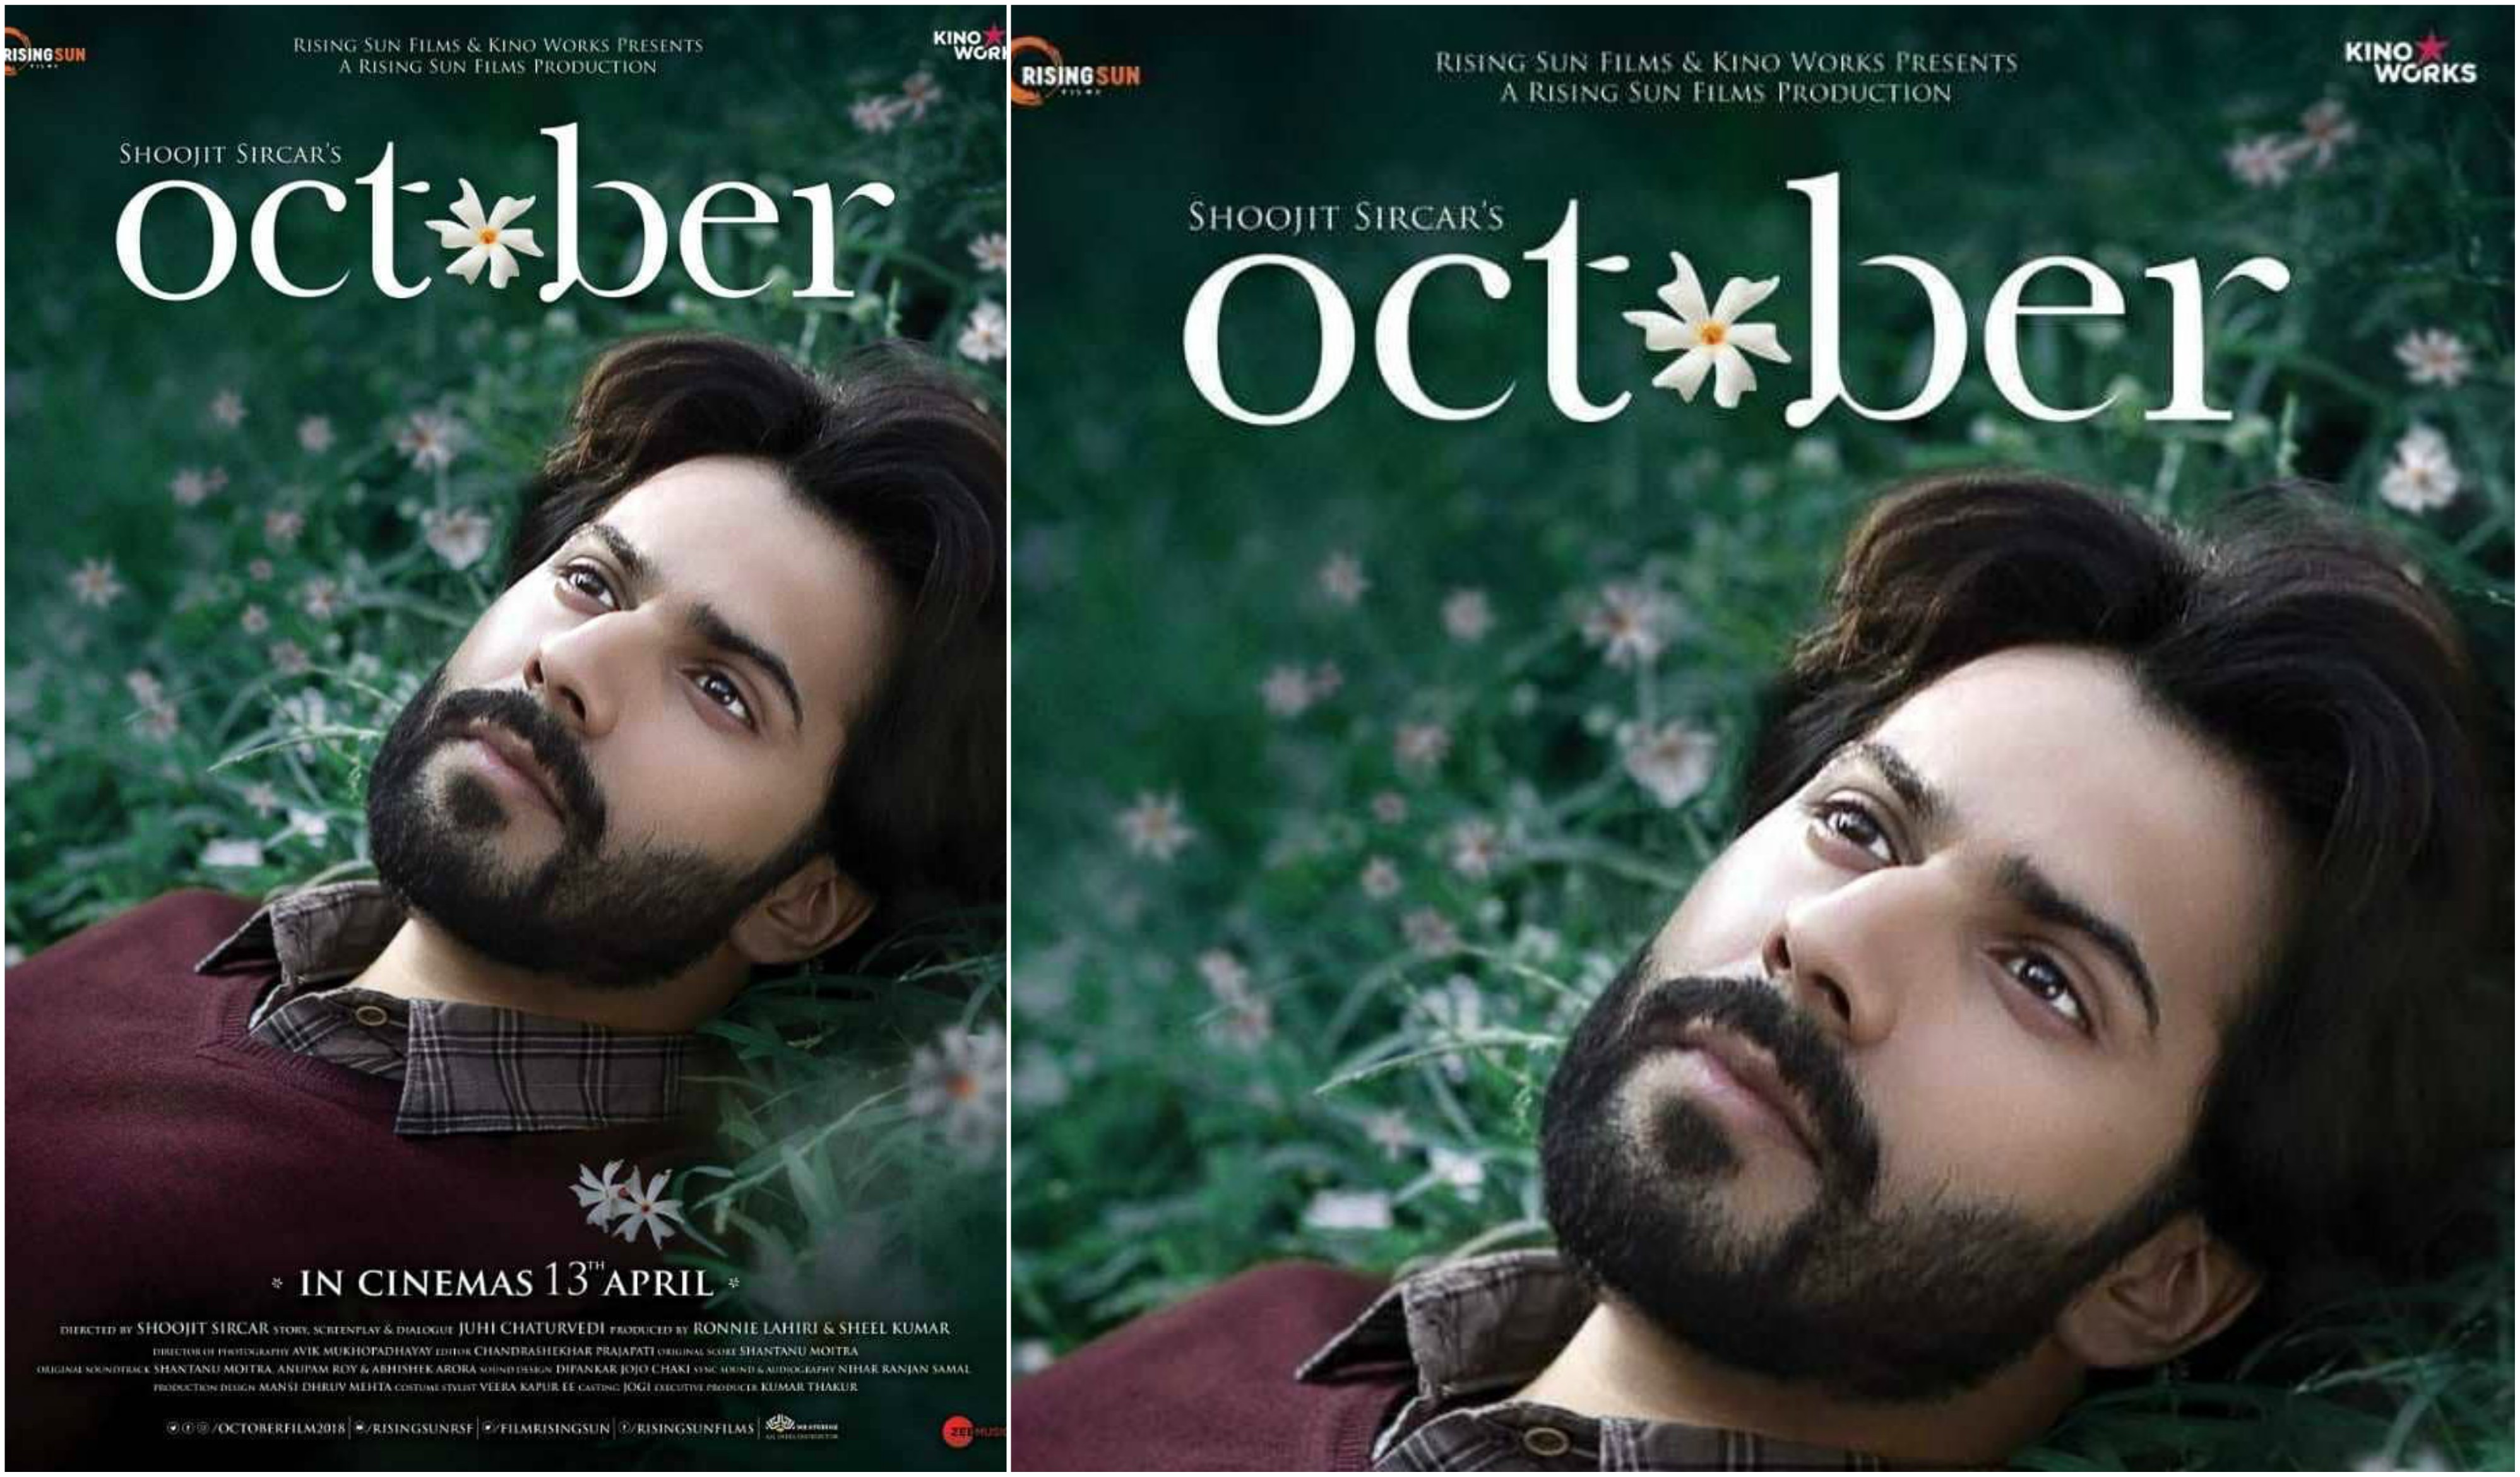 ‘October’ is a film for all seasons